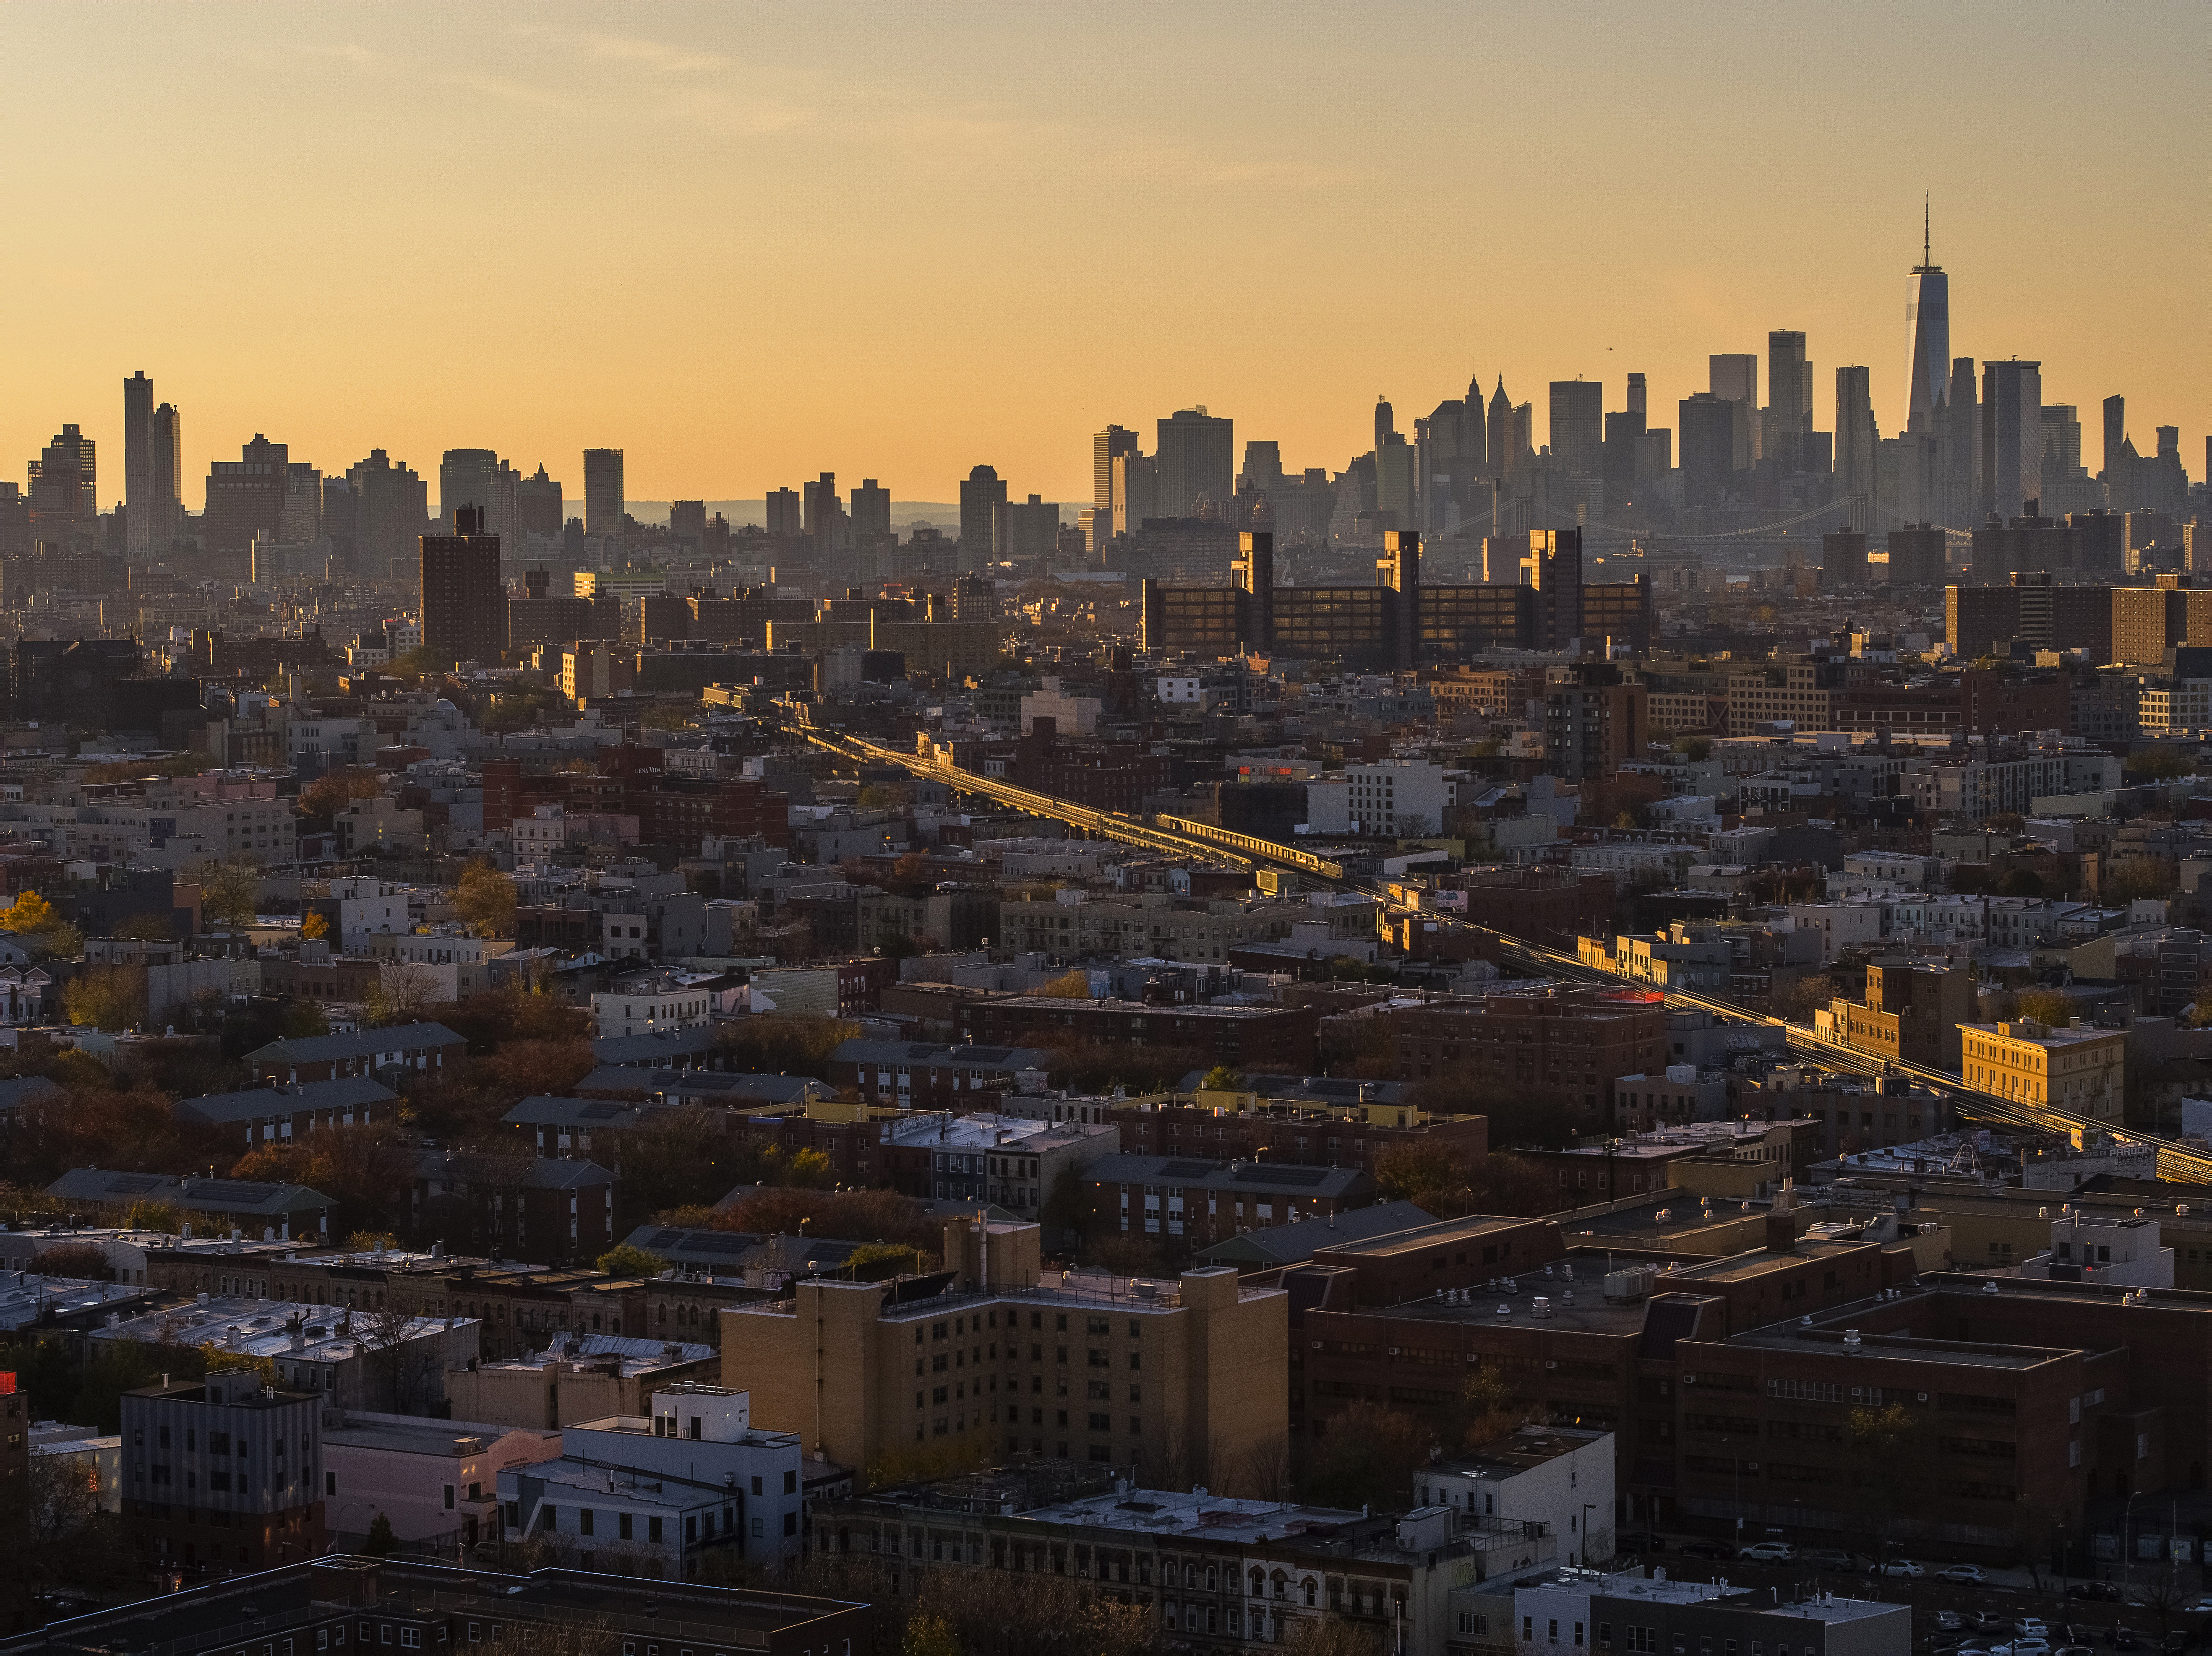 Downtown Manhattan is seen in the distance from over Bushwick, Brooklyn